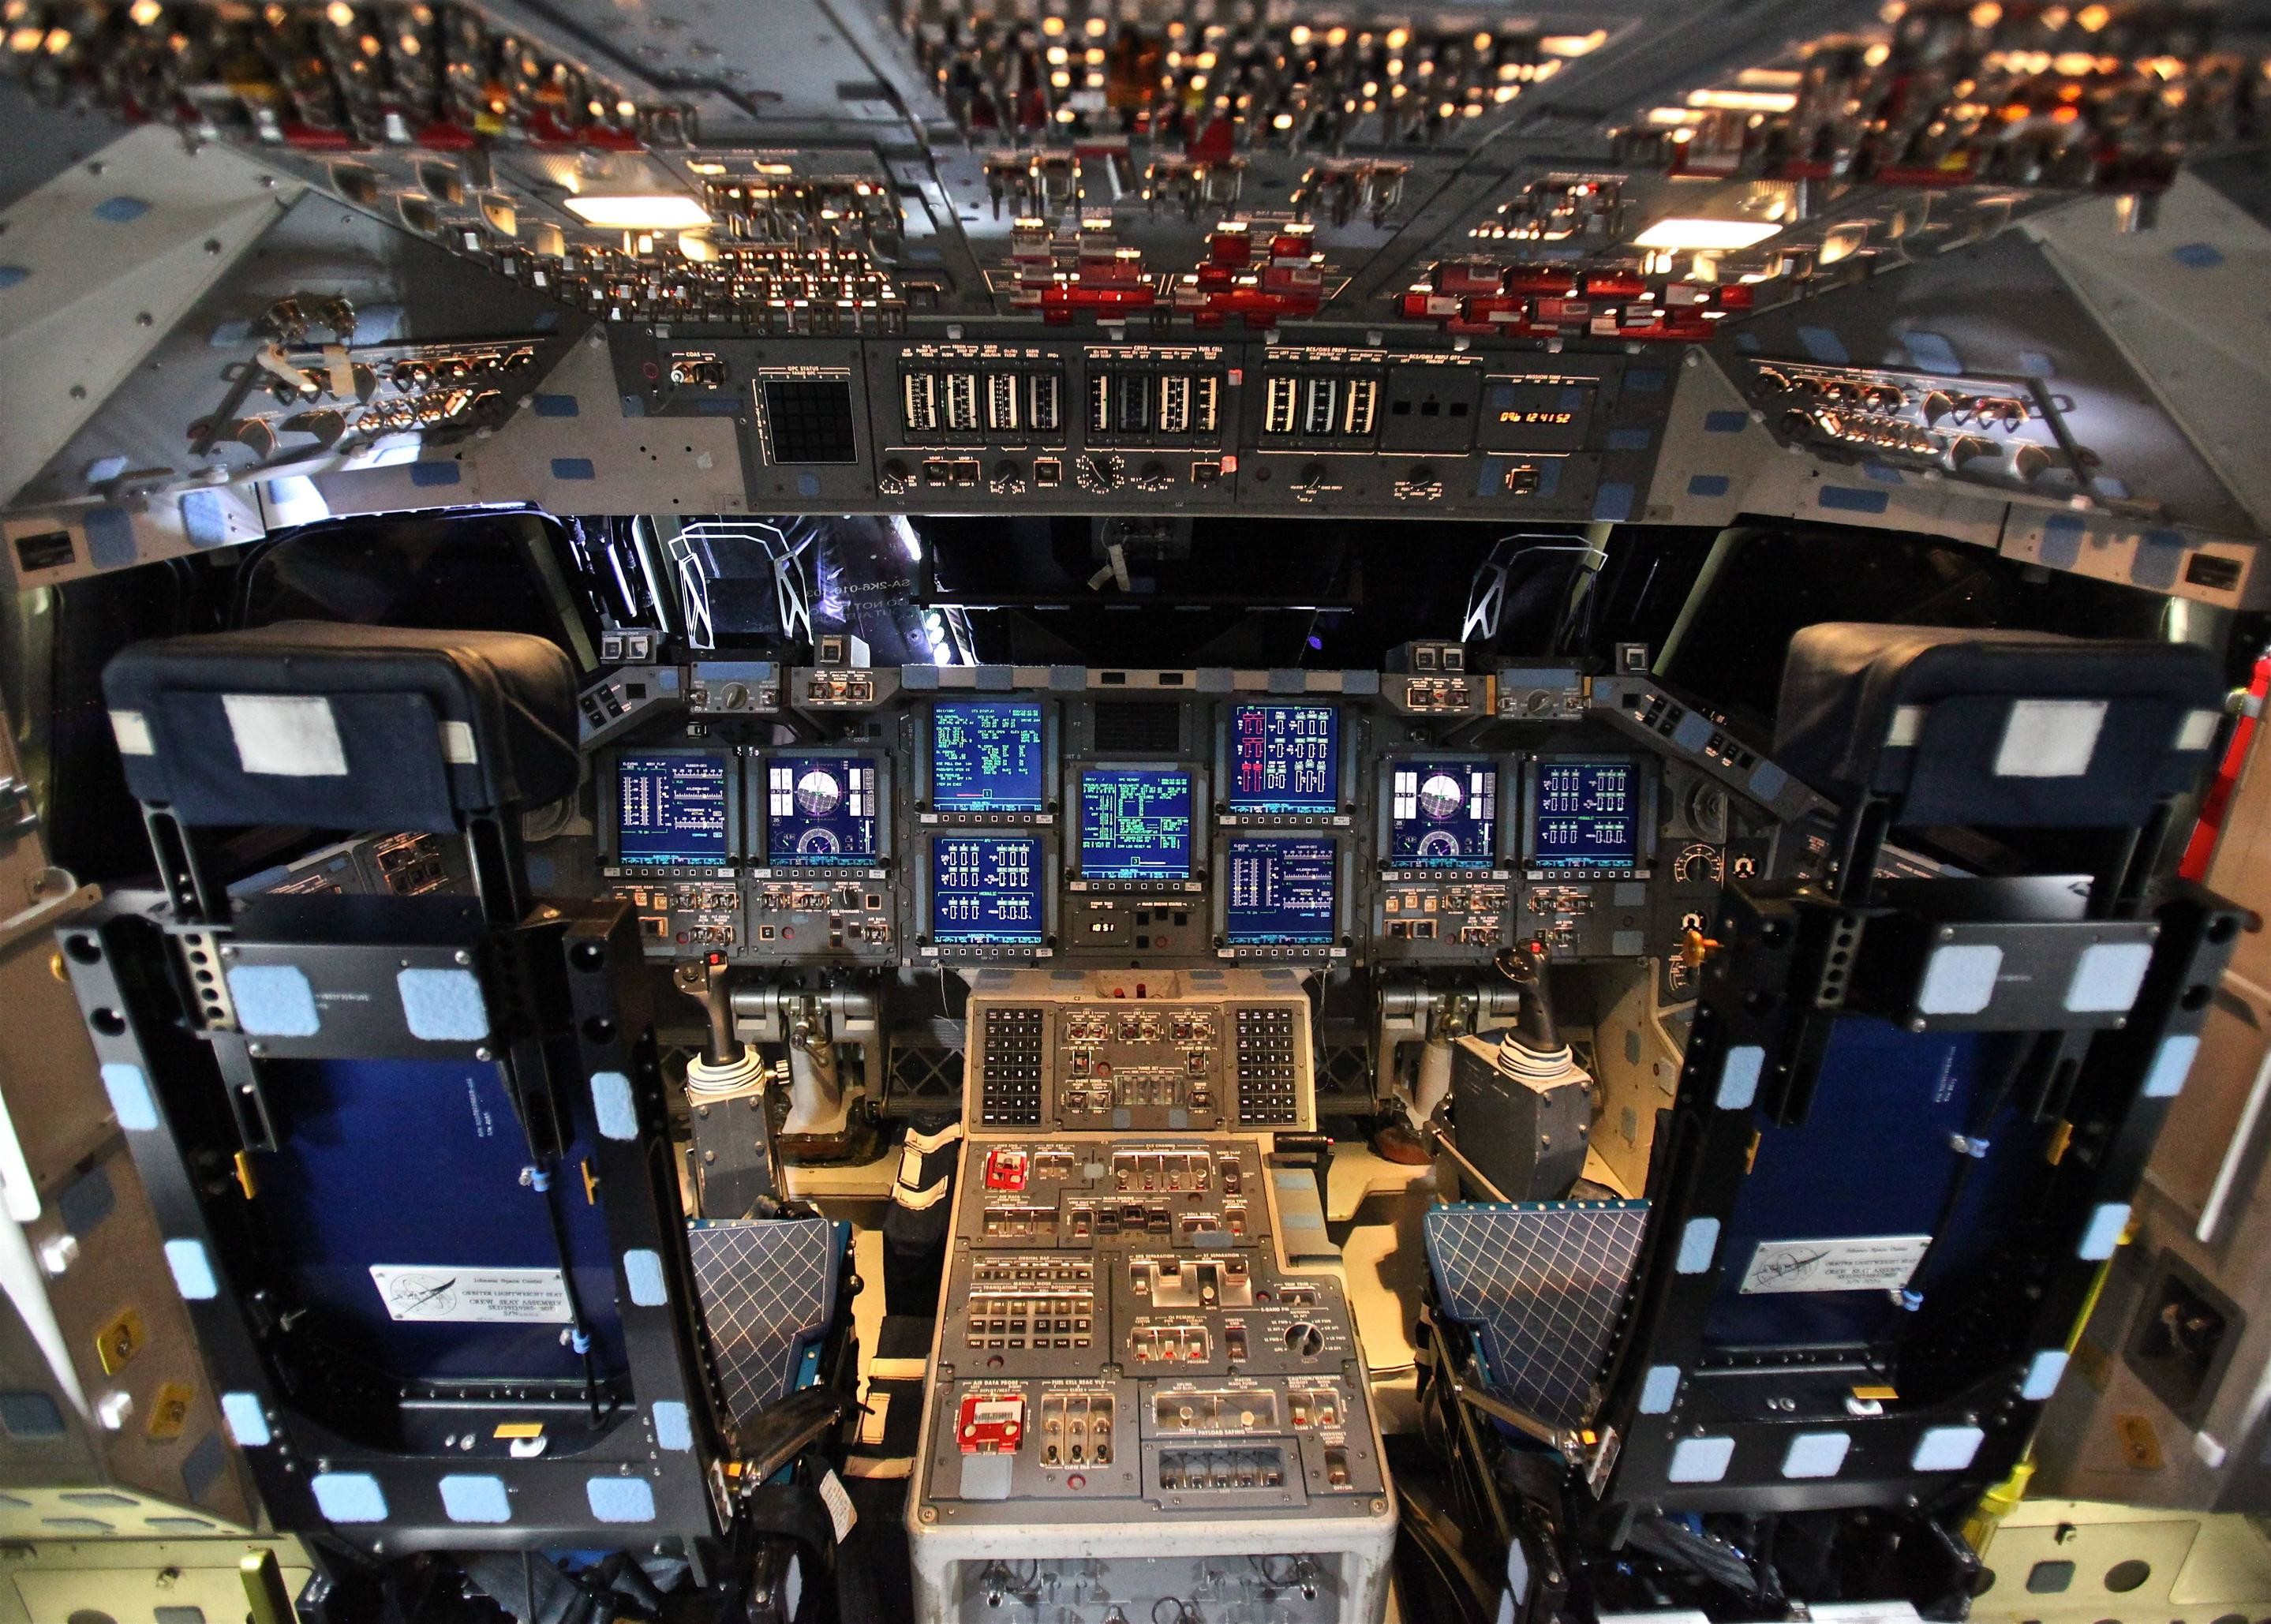 2878x2058 High Definition Collection Cockpit Wallpapers Full HD Cockpit | HD  Wallpapers | Pinterest | Airplanes, Aircraft and Aviation